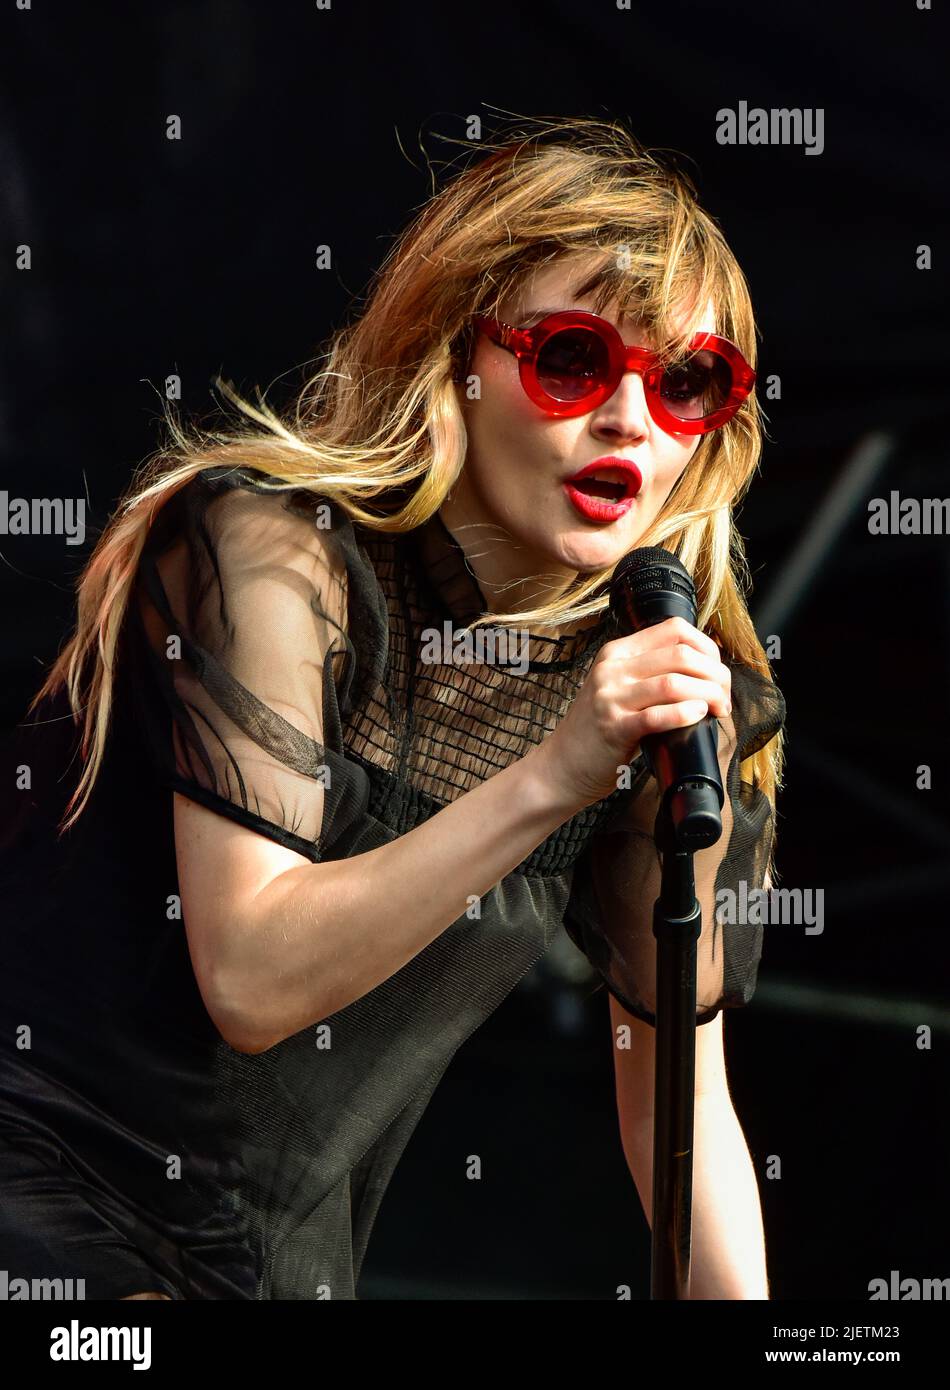 Napa Valley, California, May 27, 2022 - CHVRCHES Lauren Mayberry on stage at the 2022 BottleRock Festival in Napa California, Credit: Ken Howard/Alamy Stock Photo